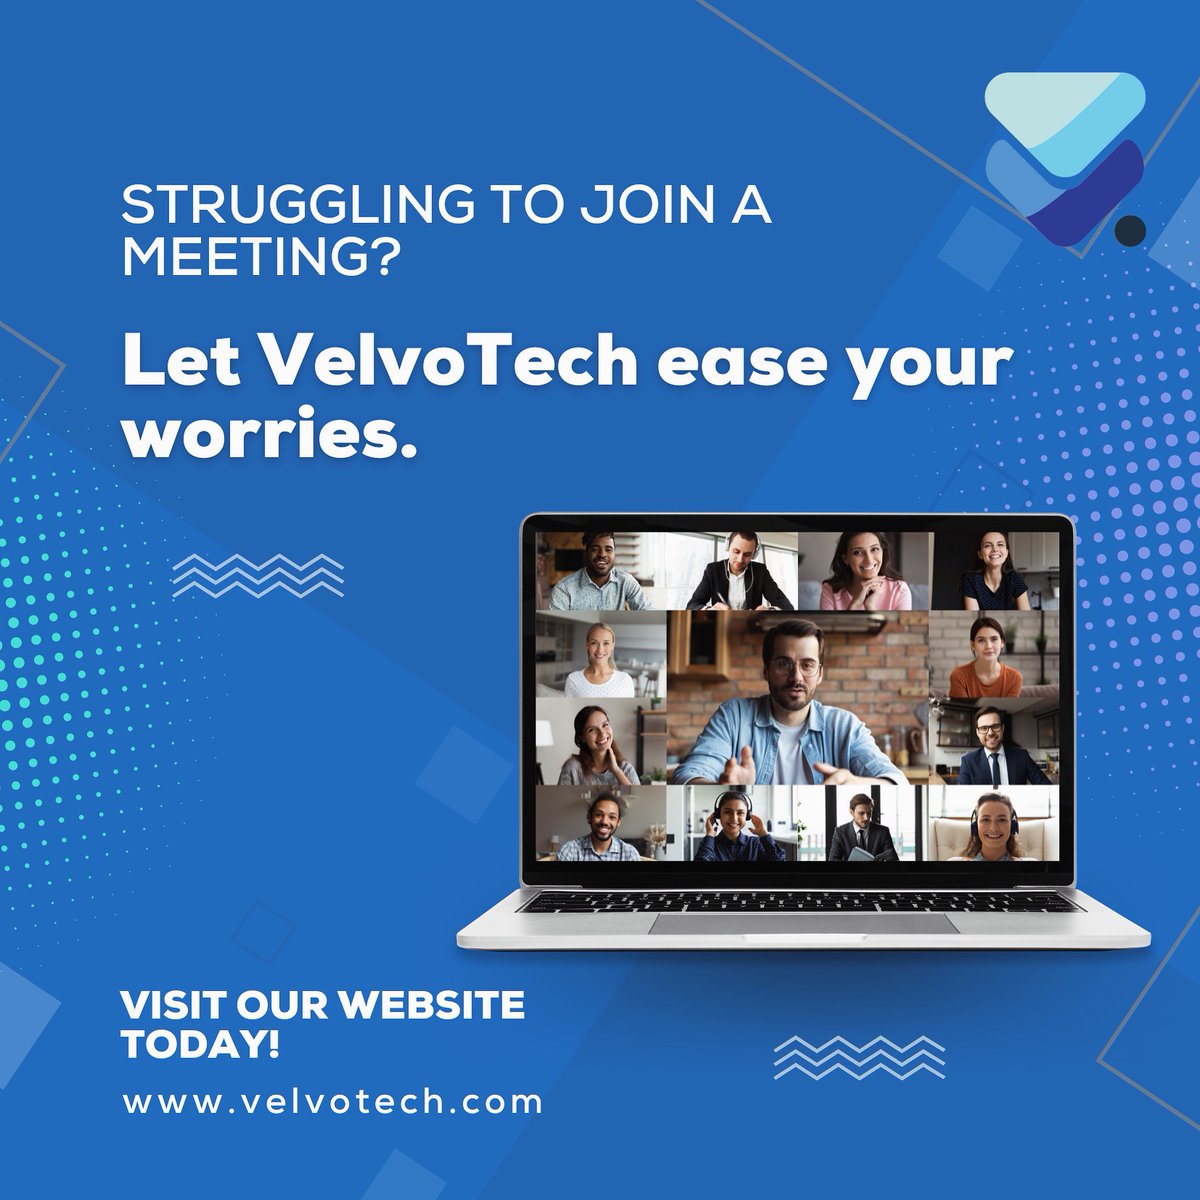 Struggling to join a meeting? Let VelvoTech ease your worries. Our meeting assistance ensures smooth setup and troubleshooting for your virtual gatherings. Join meetings hassle-free with VelvoTech. #MeetingAssistance #TechSupport #VelvoTech